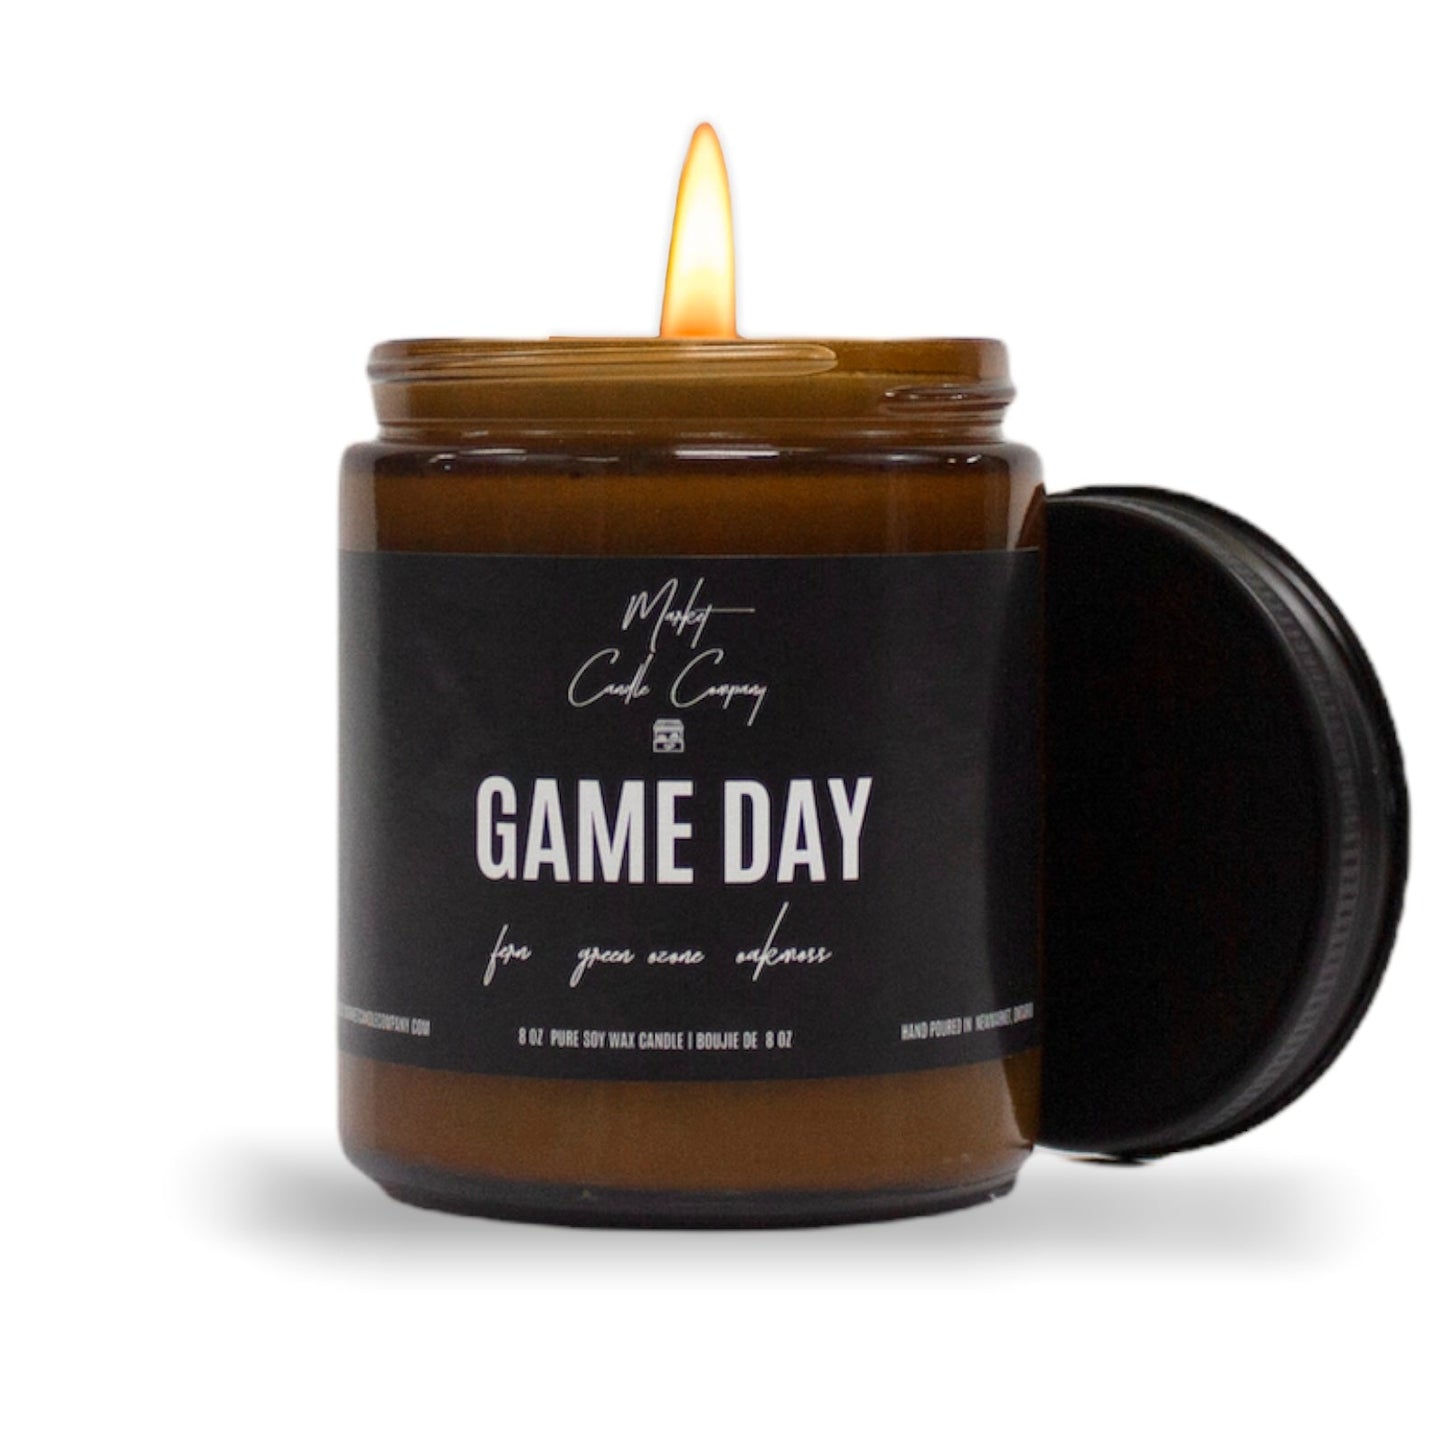 CANDLE (SOY WAX), GAME DAY 8 oz